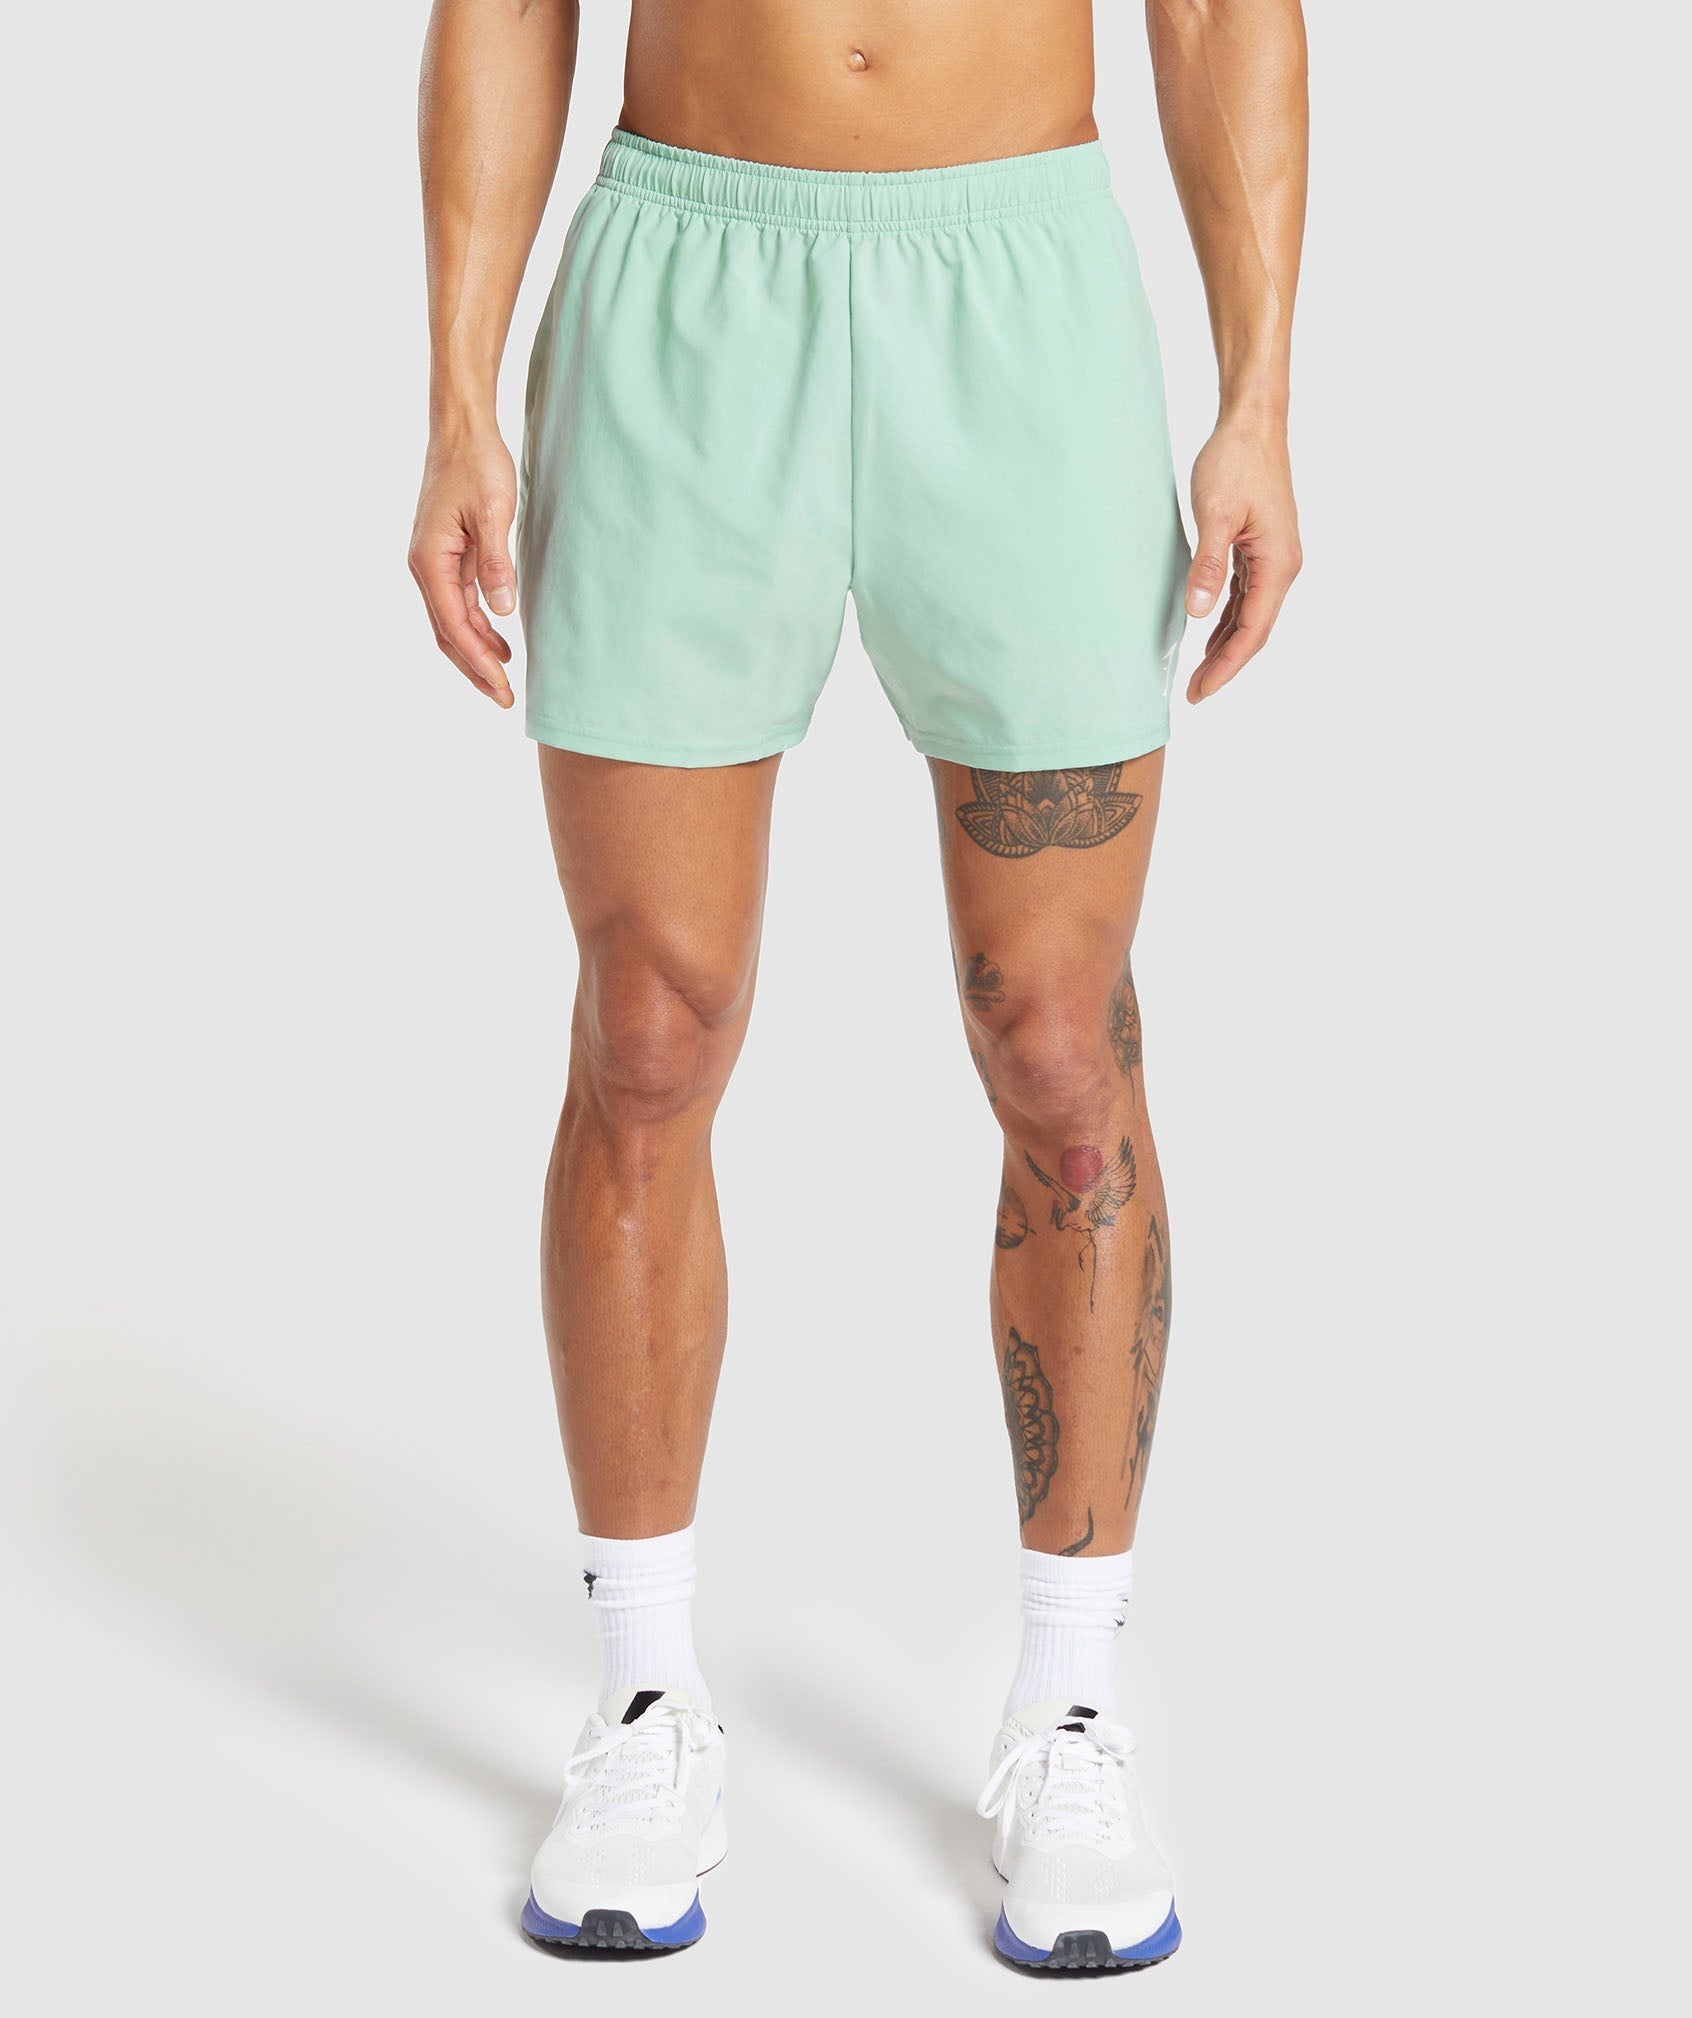 Arrival 5" Shorts in Lido Green